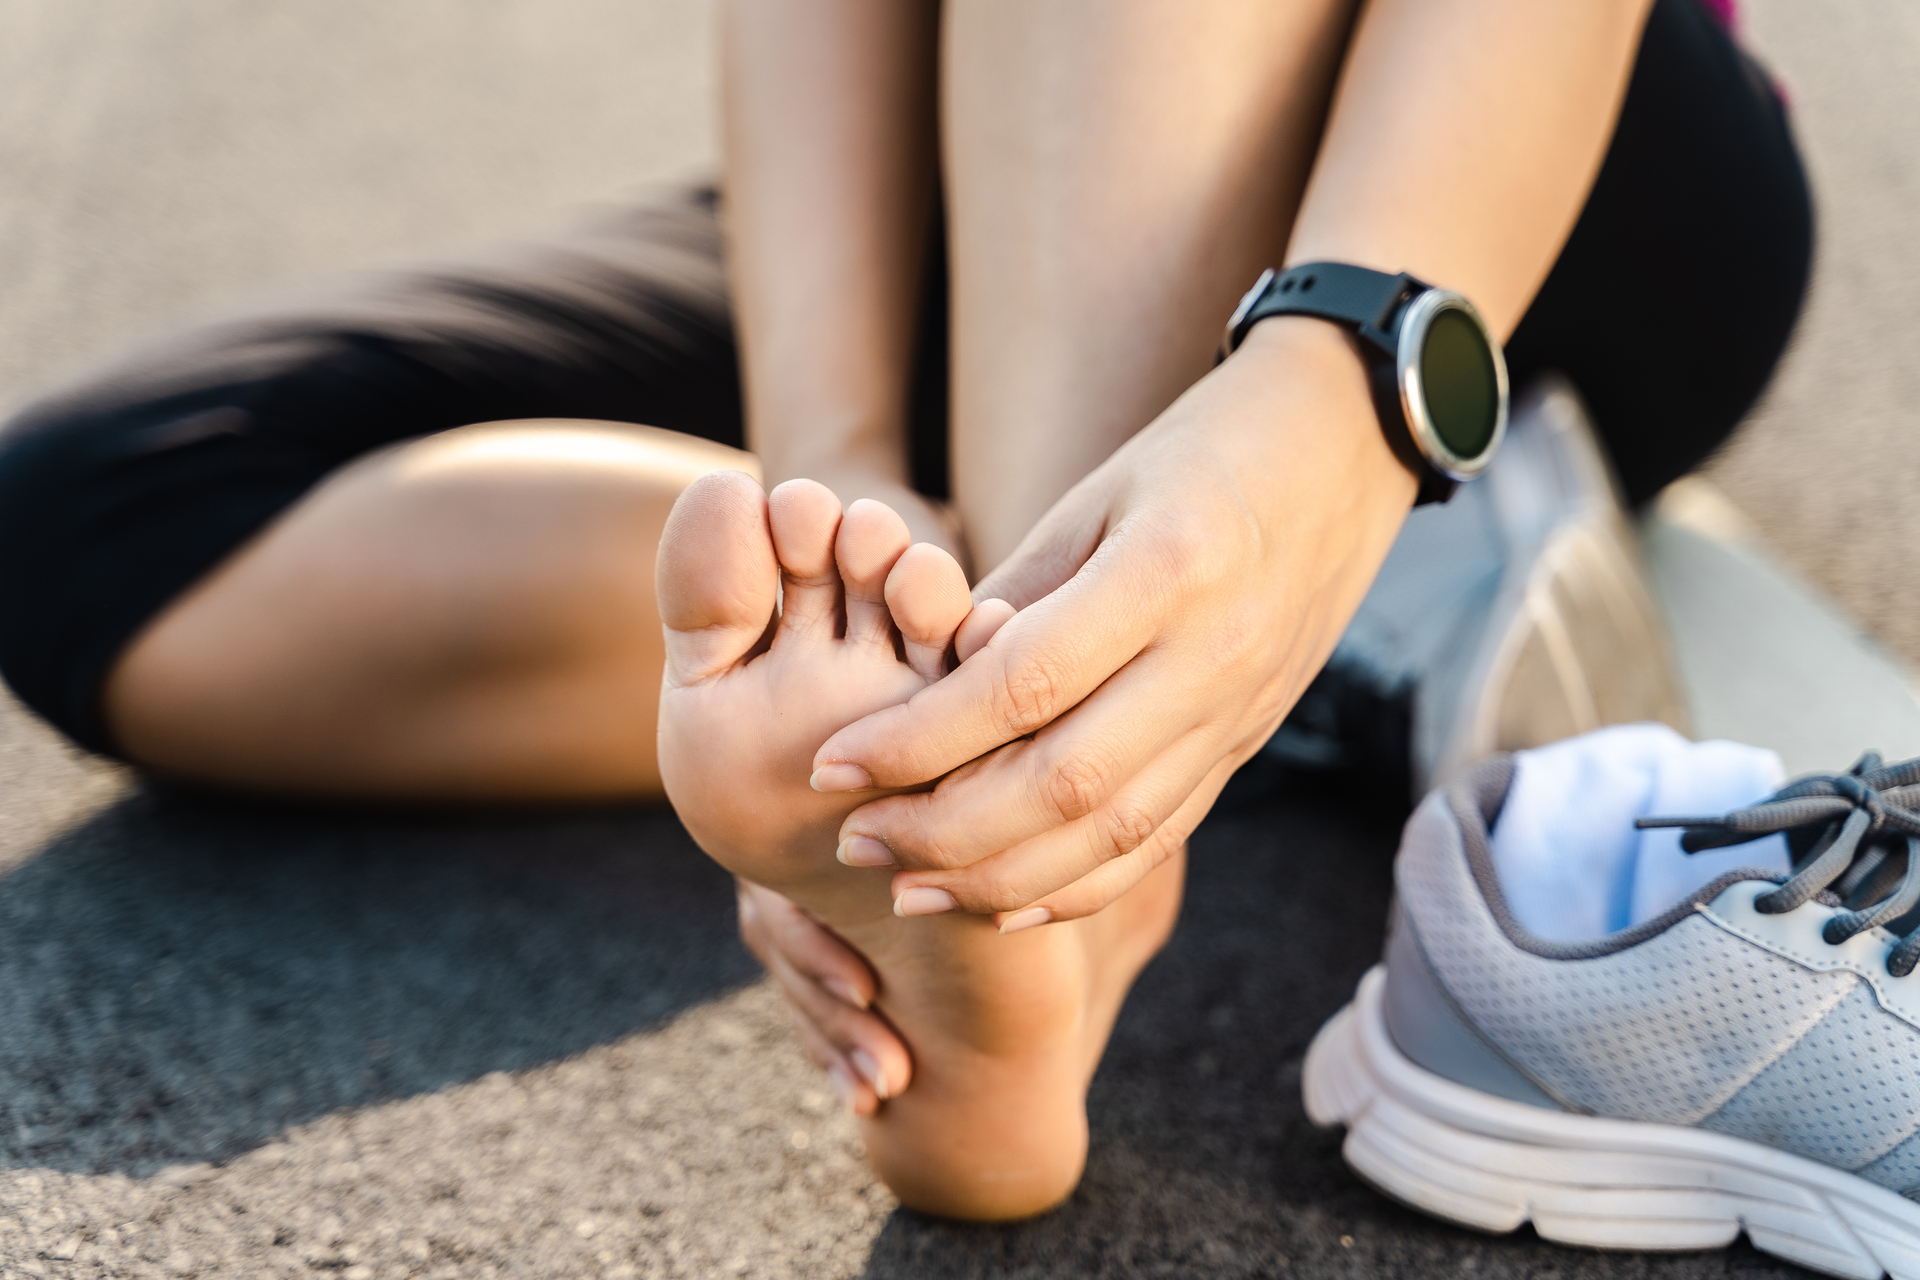 Running is a demanding activity that takes a significant toll on your feet.